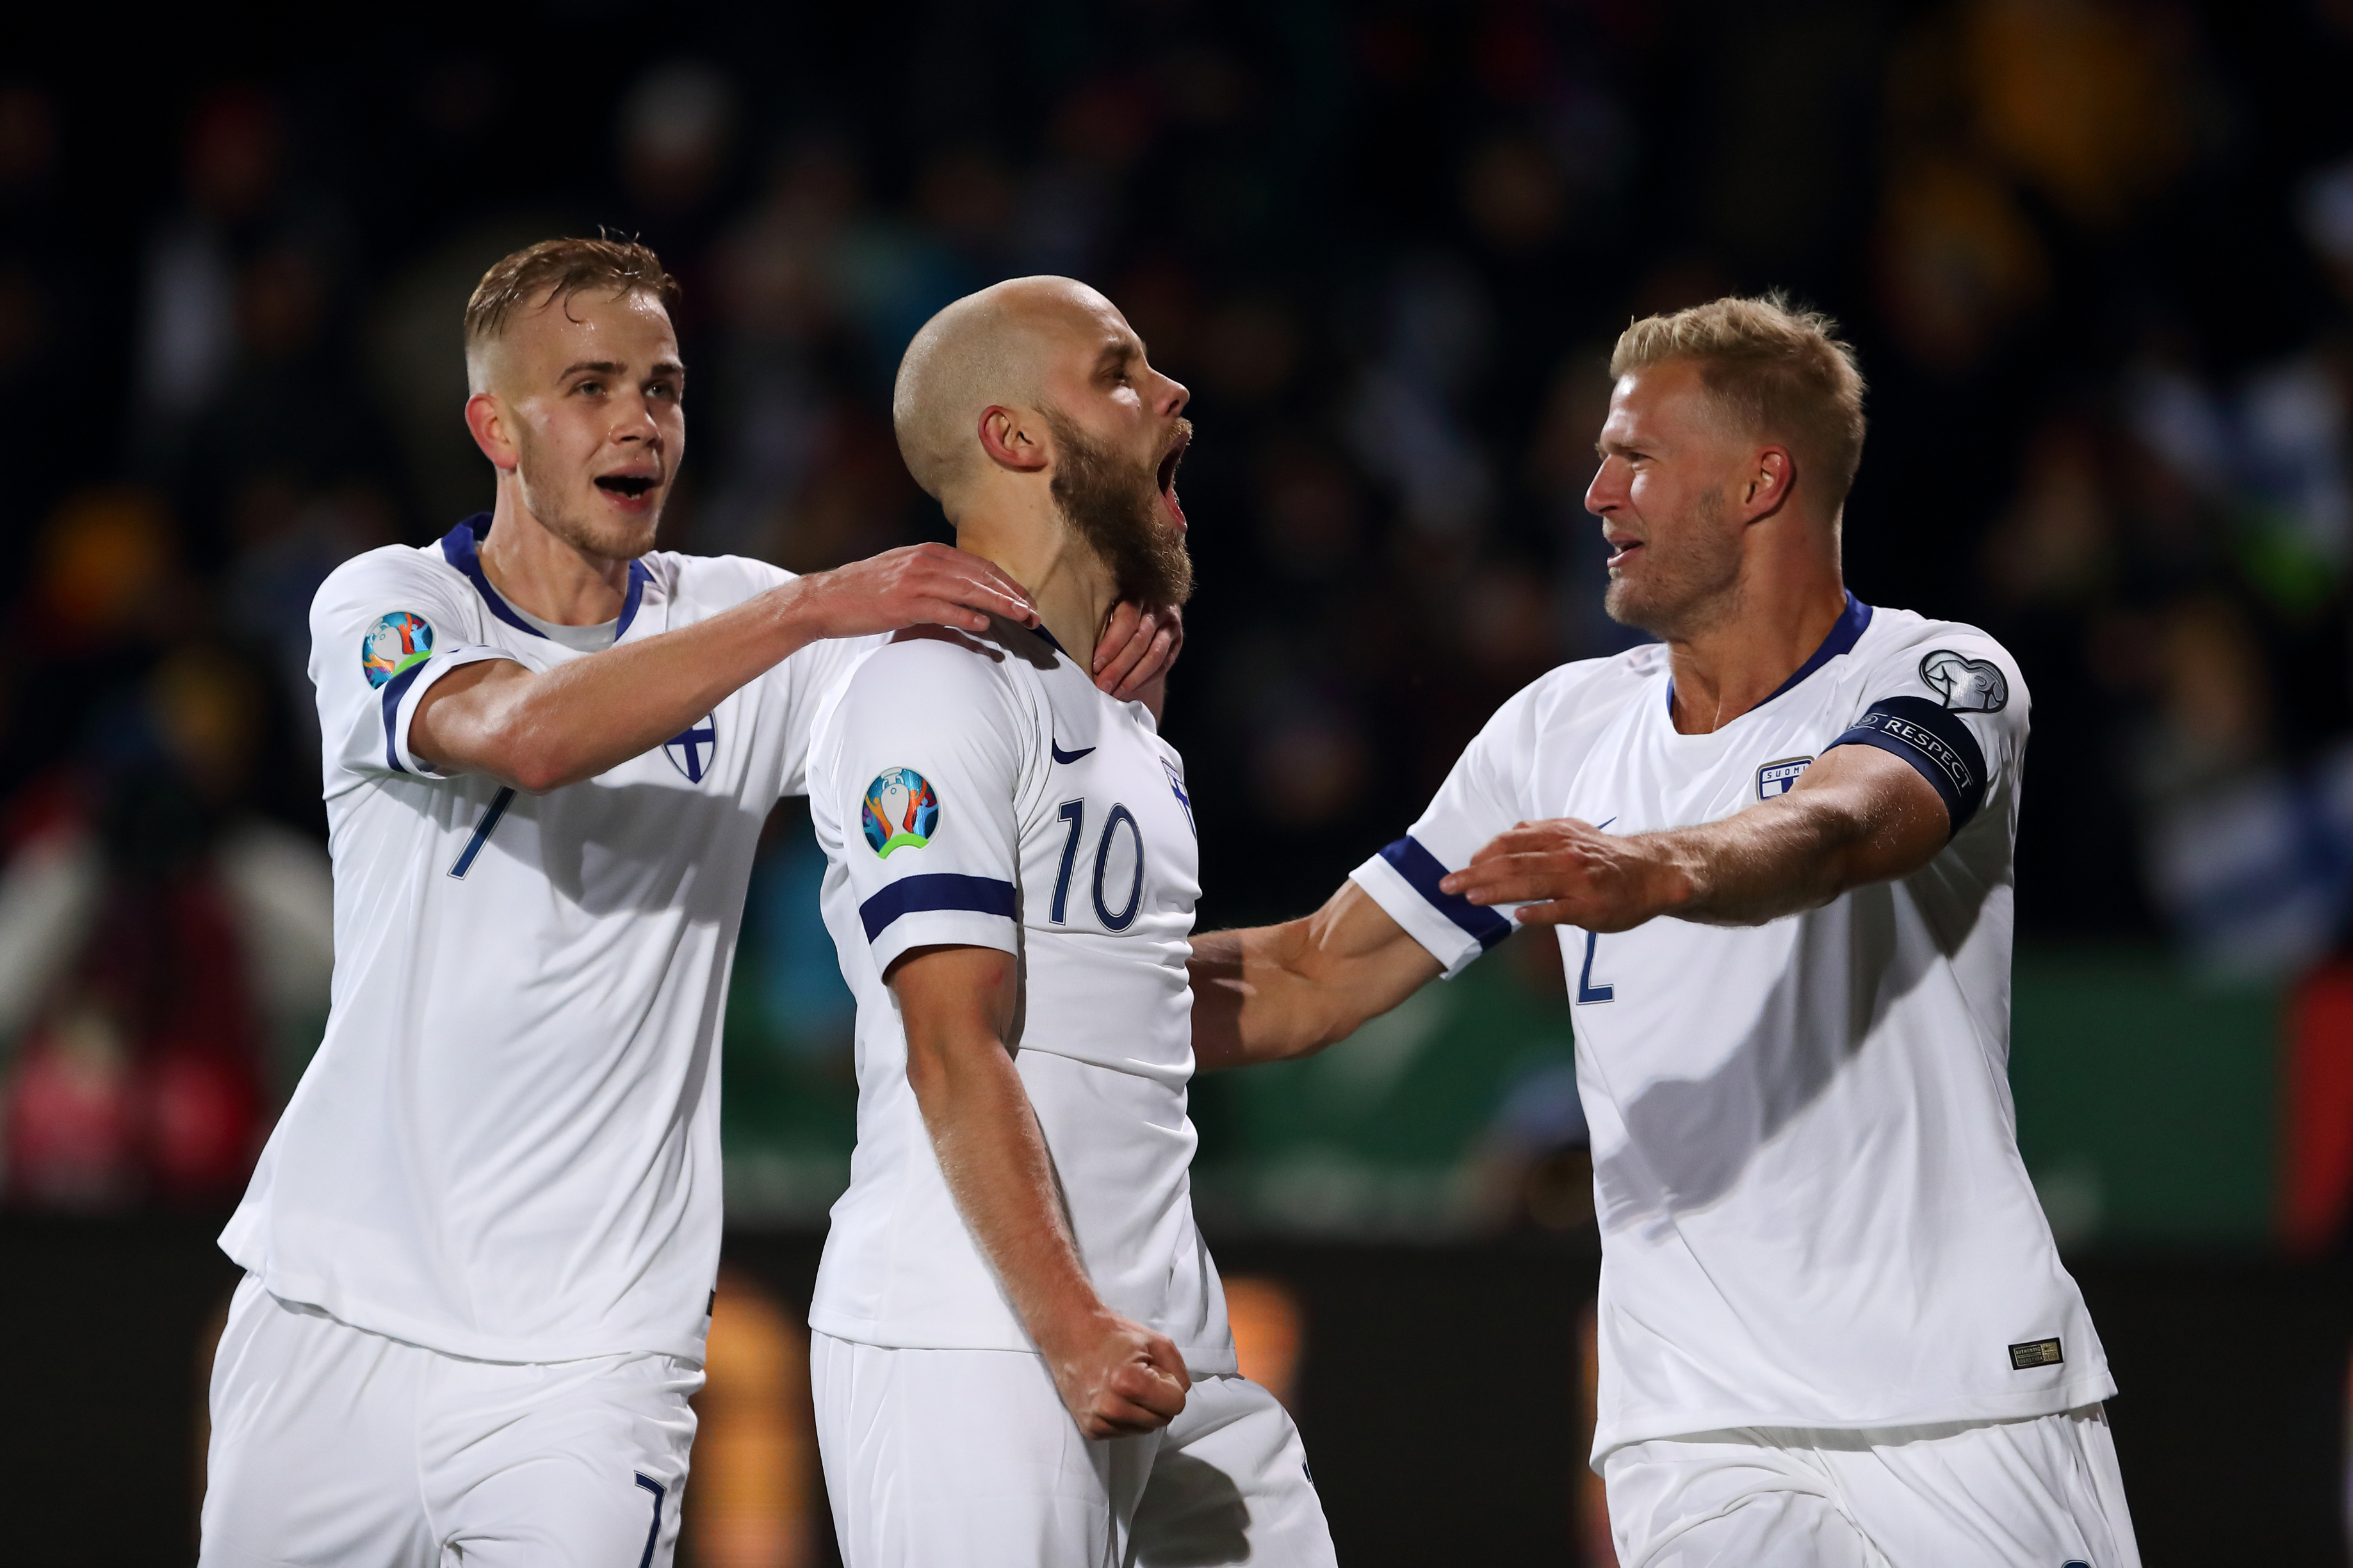 FA chair: Finland’s first euros can be played behind closed doors